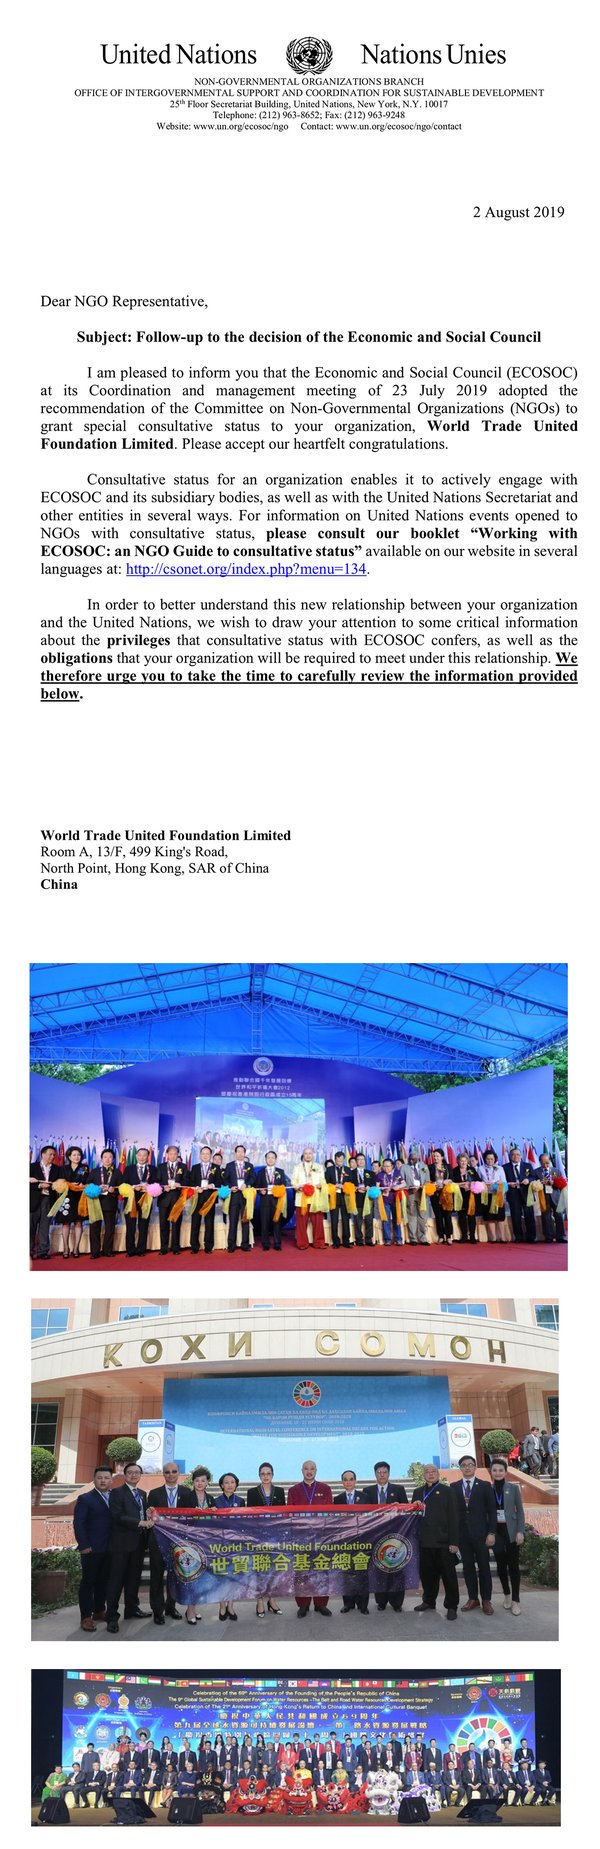 P1:The letter sent to WTUF from UN, document URL :https://esango.un.org/civilsociety/documents/665304/032_World%20Trade%20United%20Foundation%20Ltd.pdf; P2: 